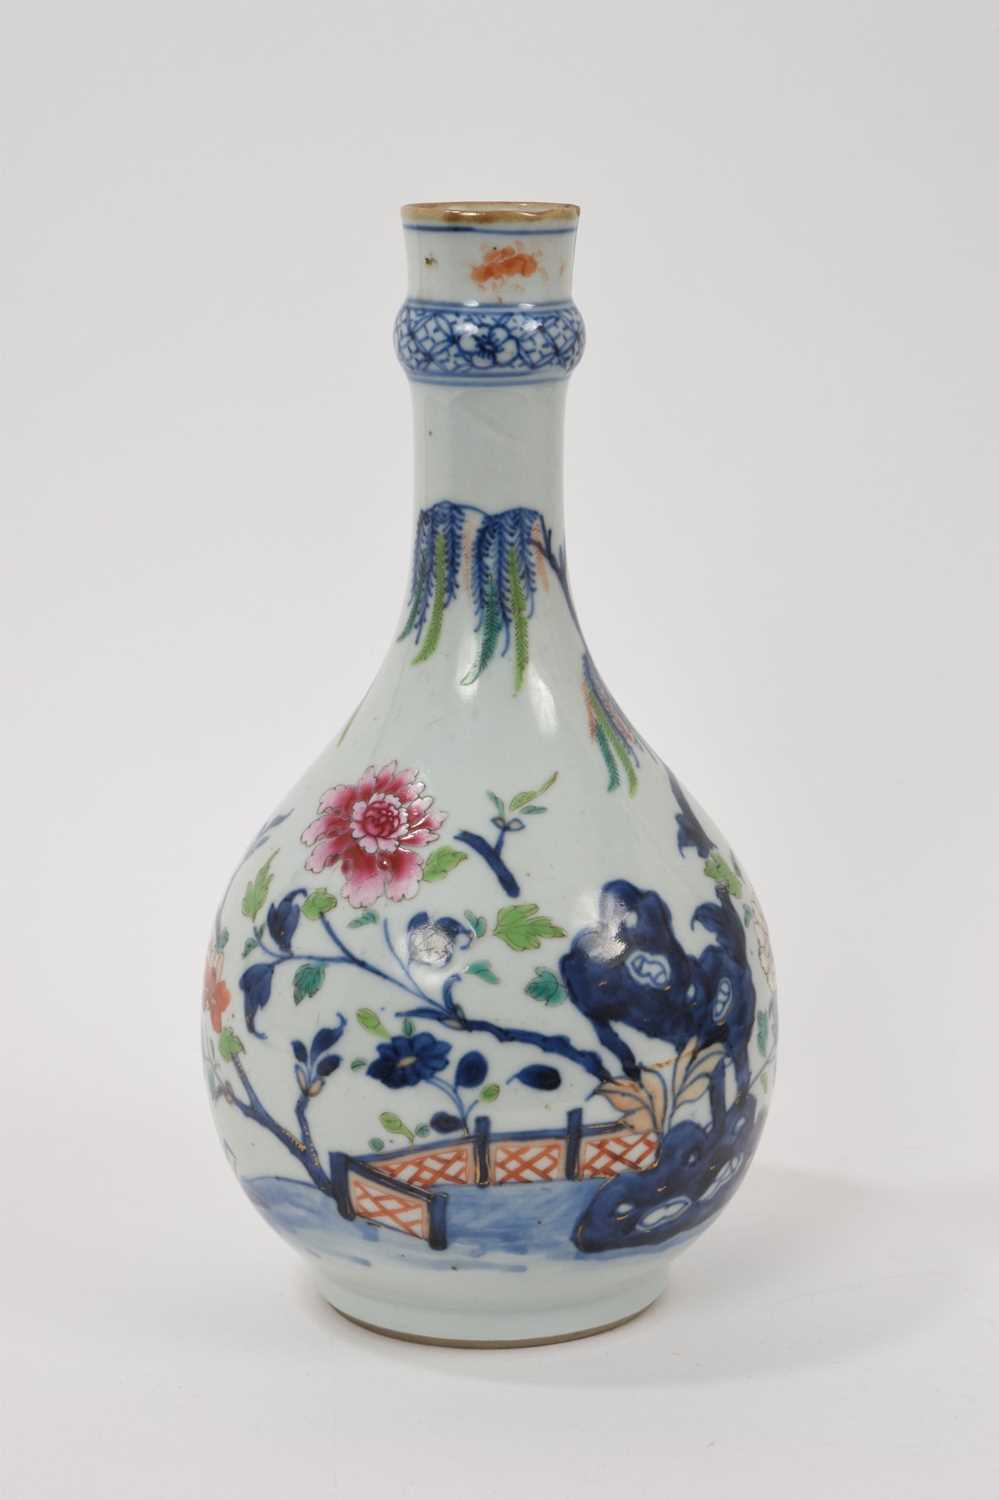 18th century Chinese porcelain guglet